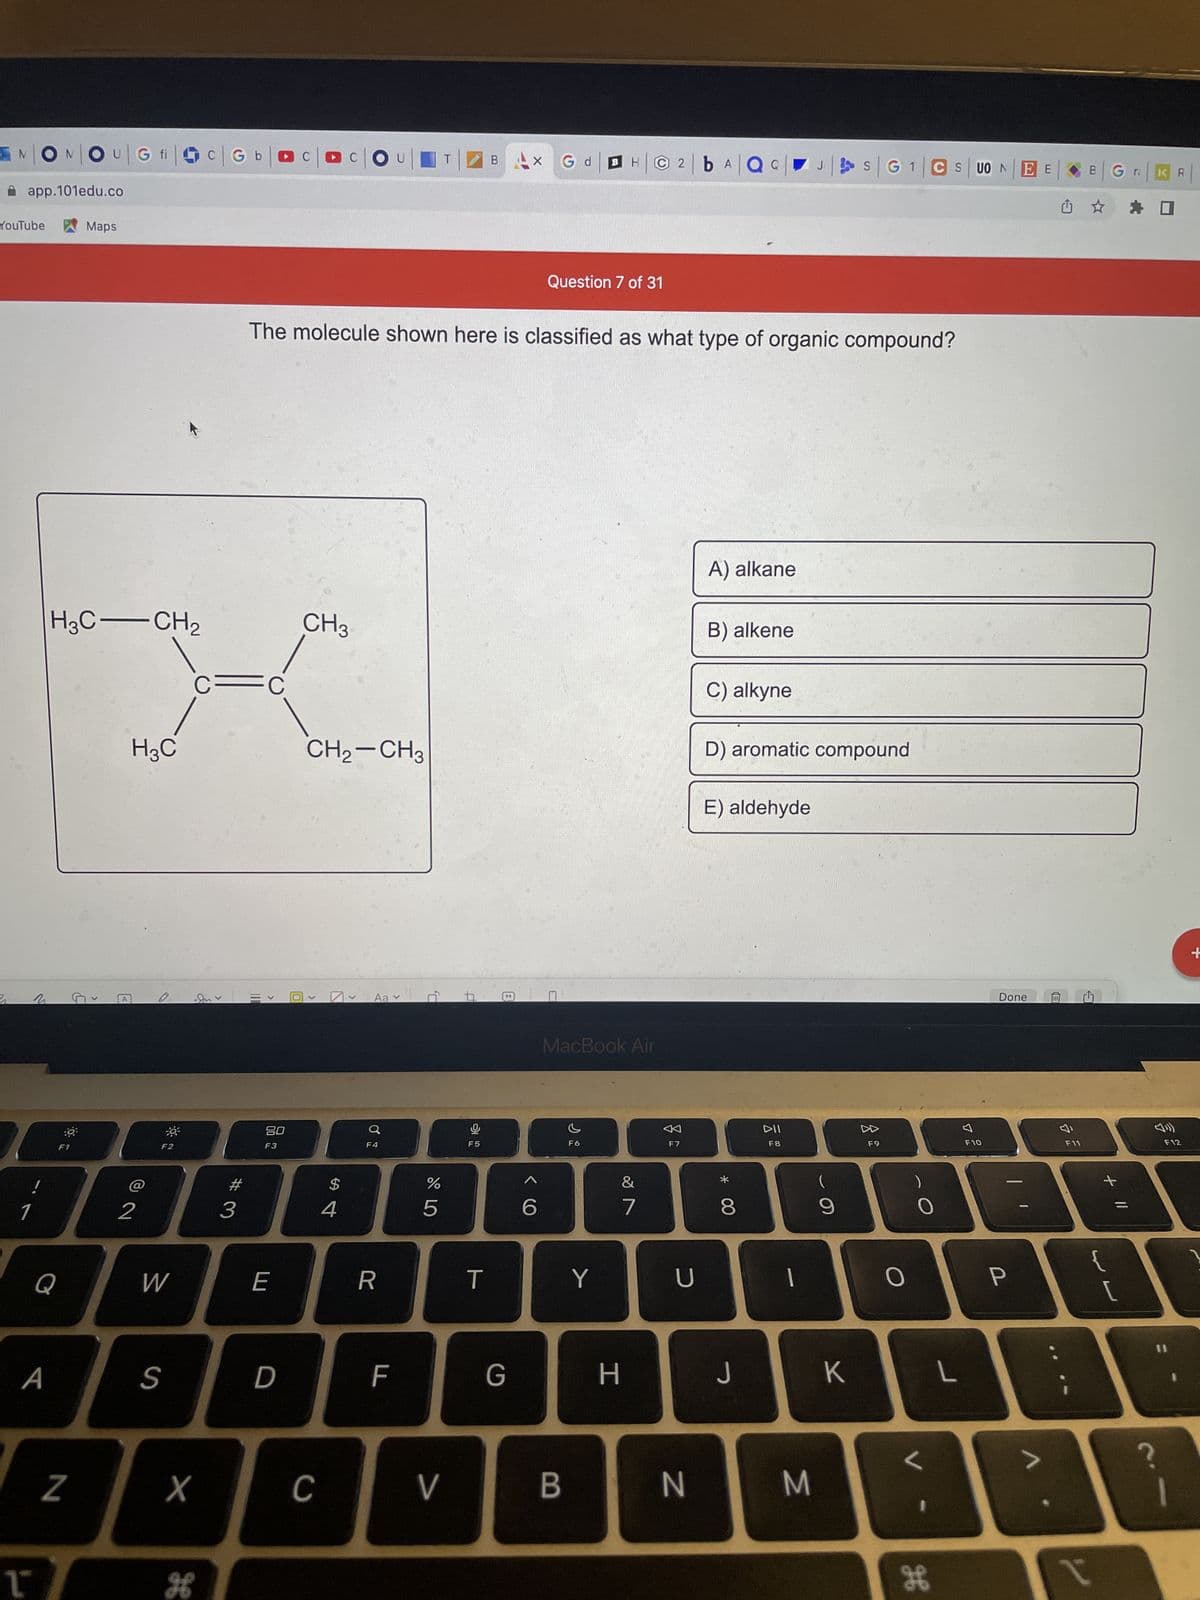 N|ON|OU|G fic
app.101edu.co
Maps
YouTube
1
N
L
H3C-CH₂
H3C
Q
A
N
G
A
© 2
-
F2
W
S
C=
X
H
Gb| CCC
|2bA|QQ
Question 7 of 31
The molecule shown here is classified as what type of organic compound?
A) alkane
CH3
B) alkene
C) alkyne
CH₂-CH3
D) aromatic compound
E) aldehyde
V
Aa v
>
#3
II
>
80
F3
E
D
C
$
4
Q
F4
R
F
D,
67 dº
%
5
V
F5
T
BAX G d
G
MacBook Air
F6
B
Y
&
7
H
F7
U
N
*
8
J
DII
F8
M
(
9
K
S|G1|CS UONEE
F9
O
)
H
L
7
F10
Done
P
F11
B
←
L
x
Gra
+ 11
KR
☐
F12
+